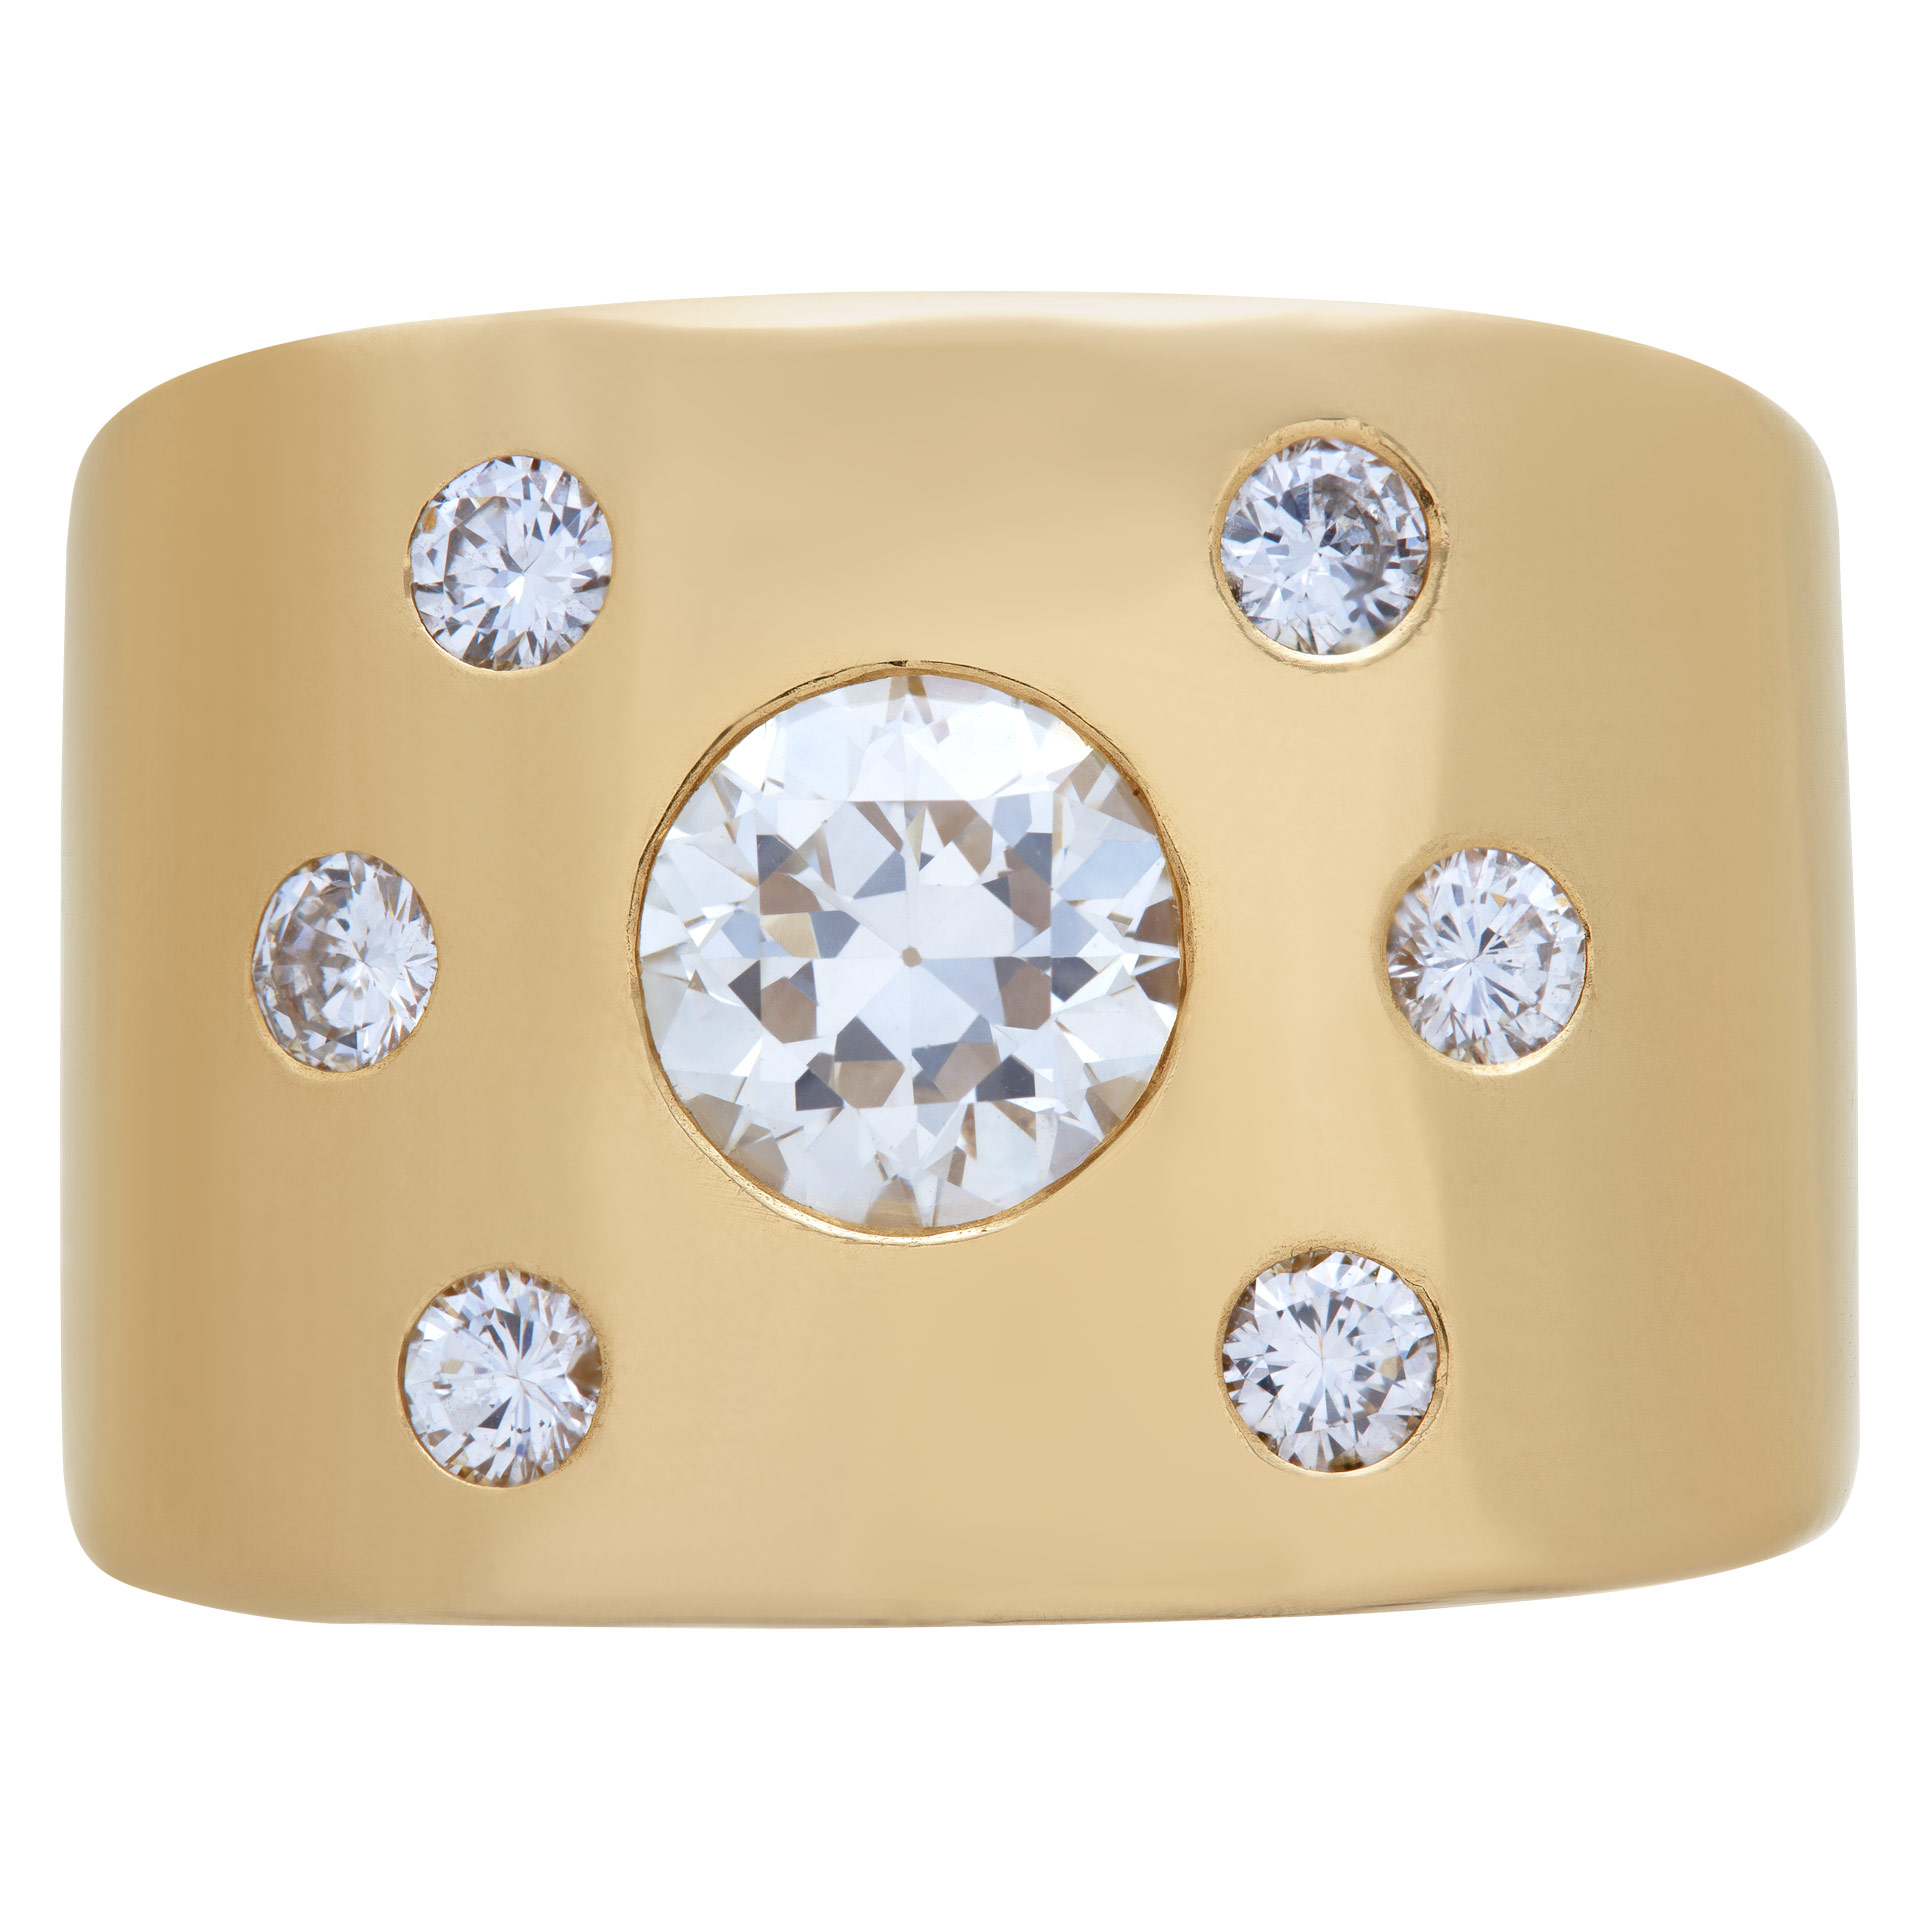 Wide diamonds ring in solid 14k yellow gold. Round brilliant cut diamonds total approx. weight: 1.42 carat,`